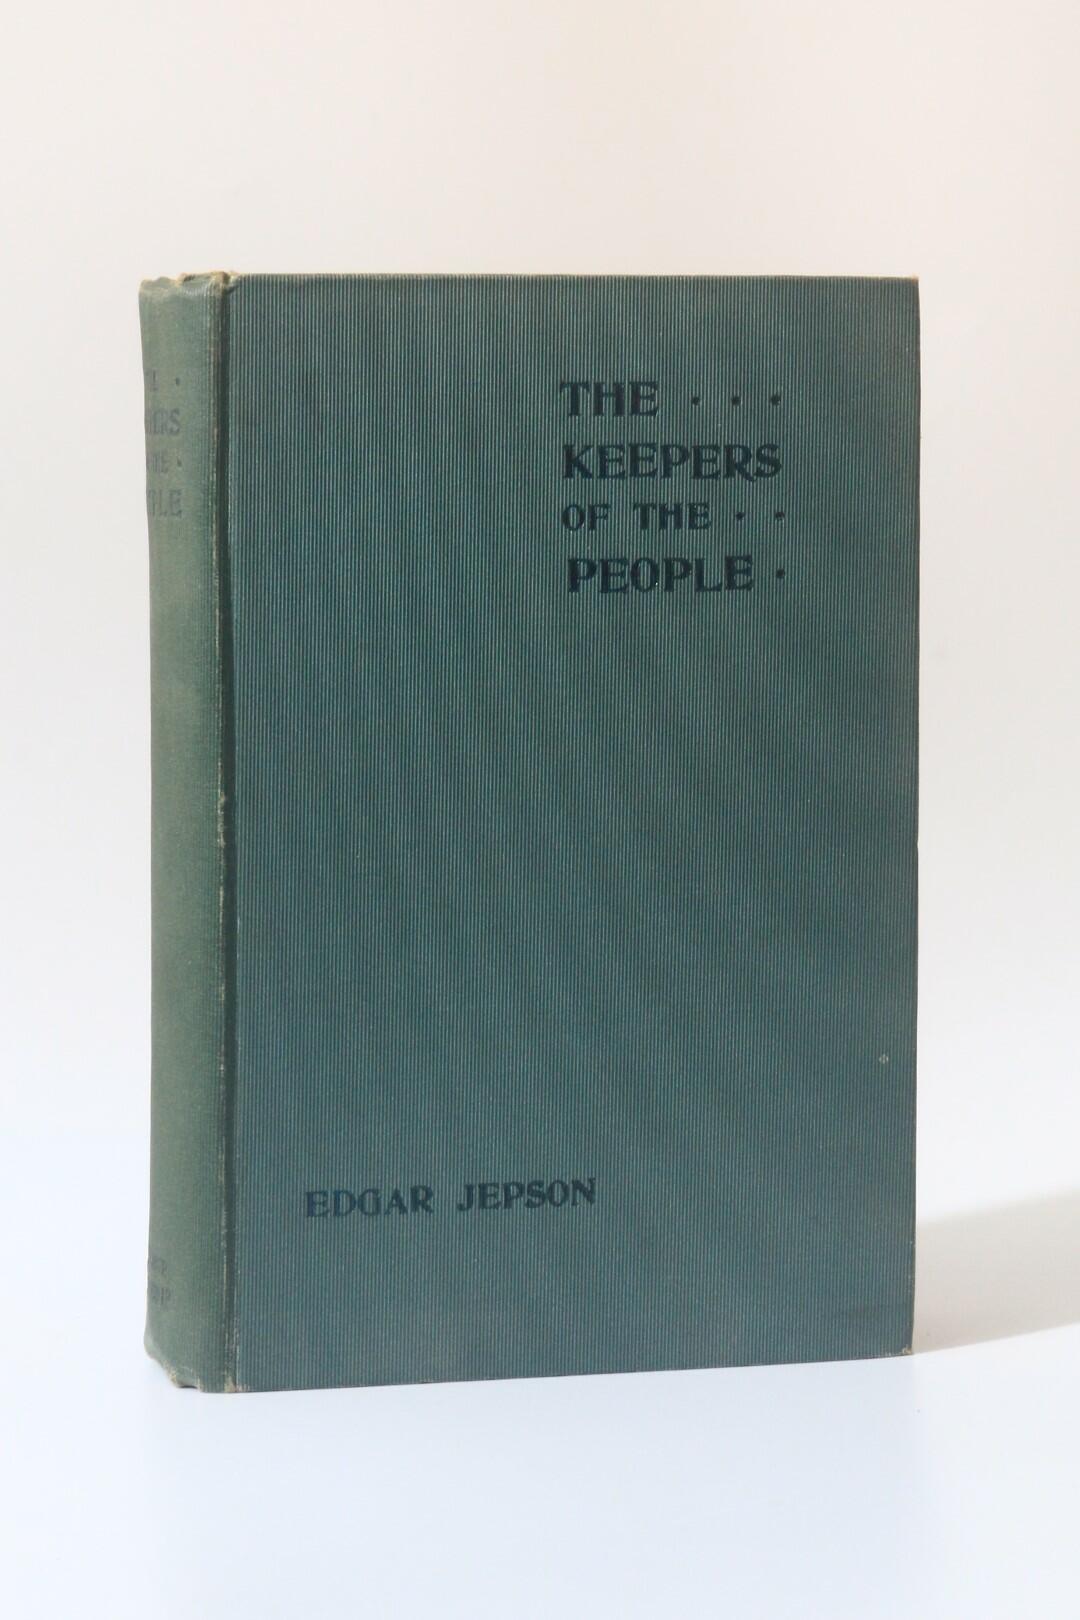 Edgar Jepson - The Keepers of the People - C. Arthur Pearson, 1898, First Edition.